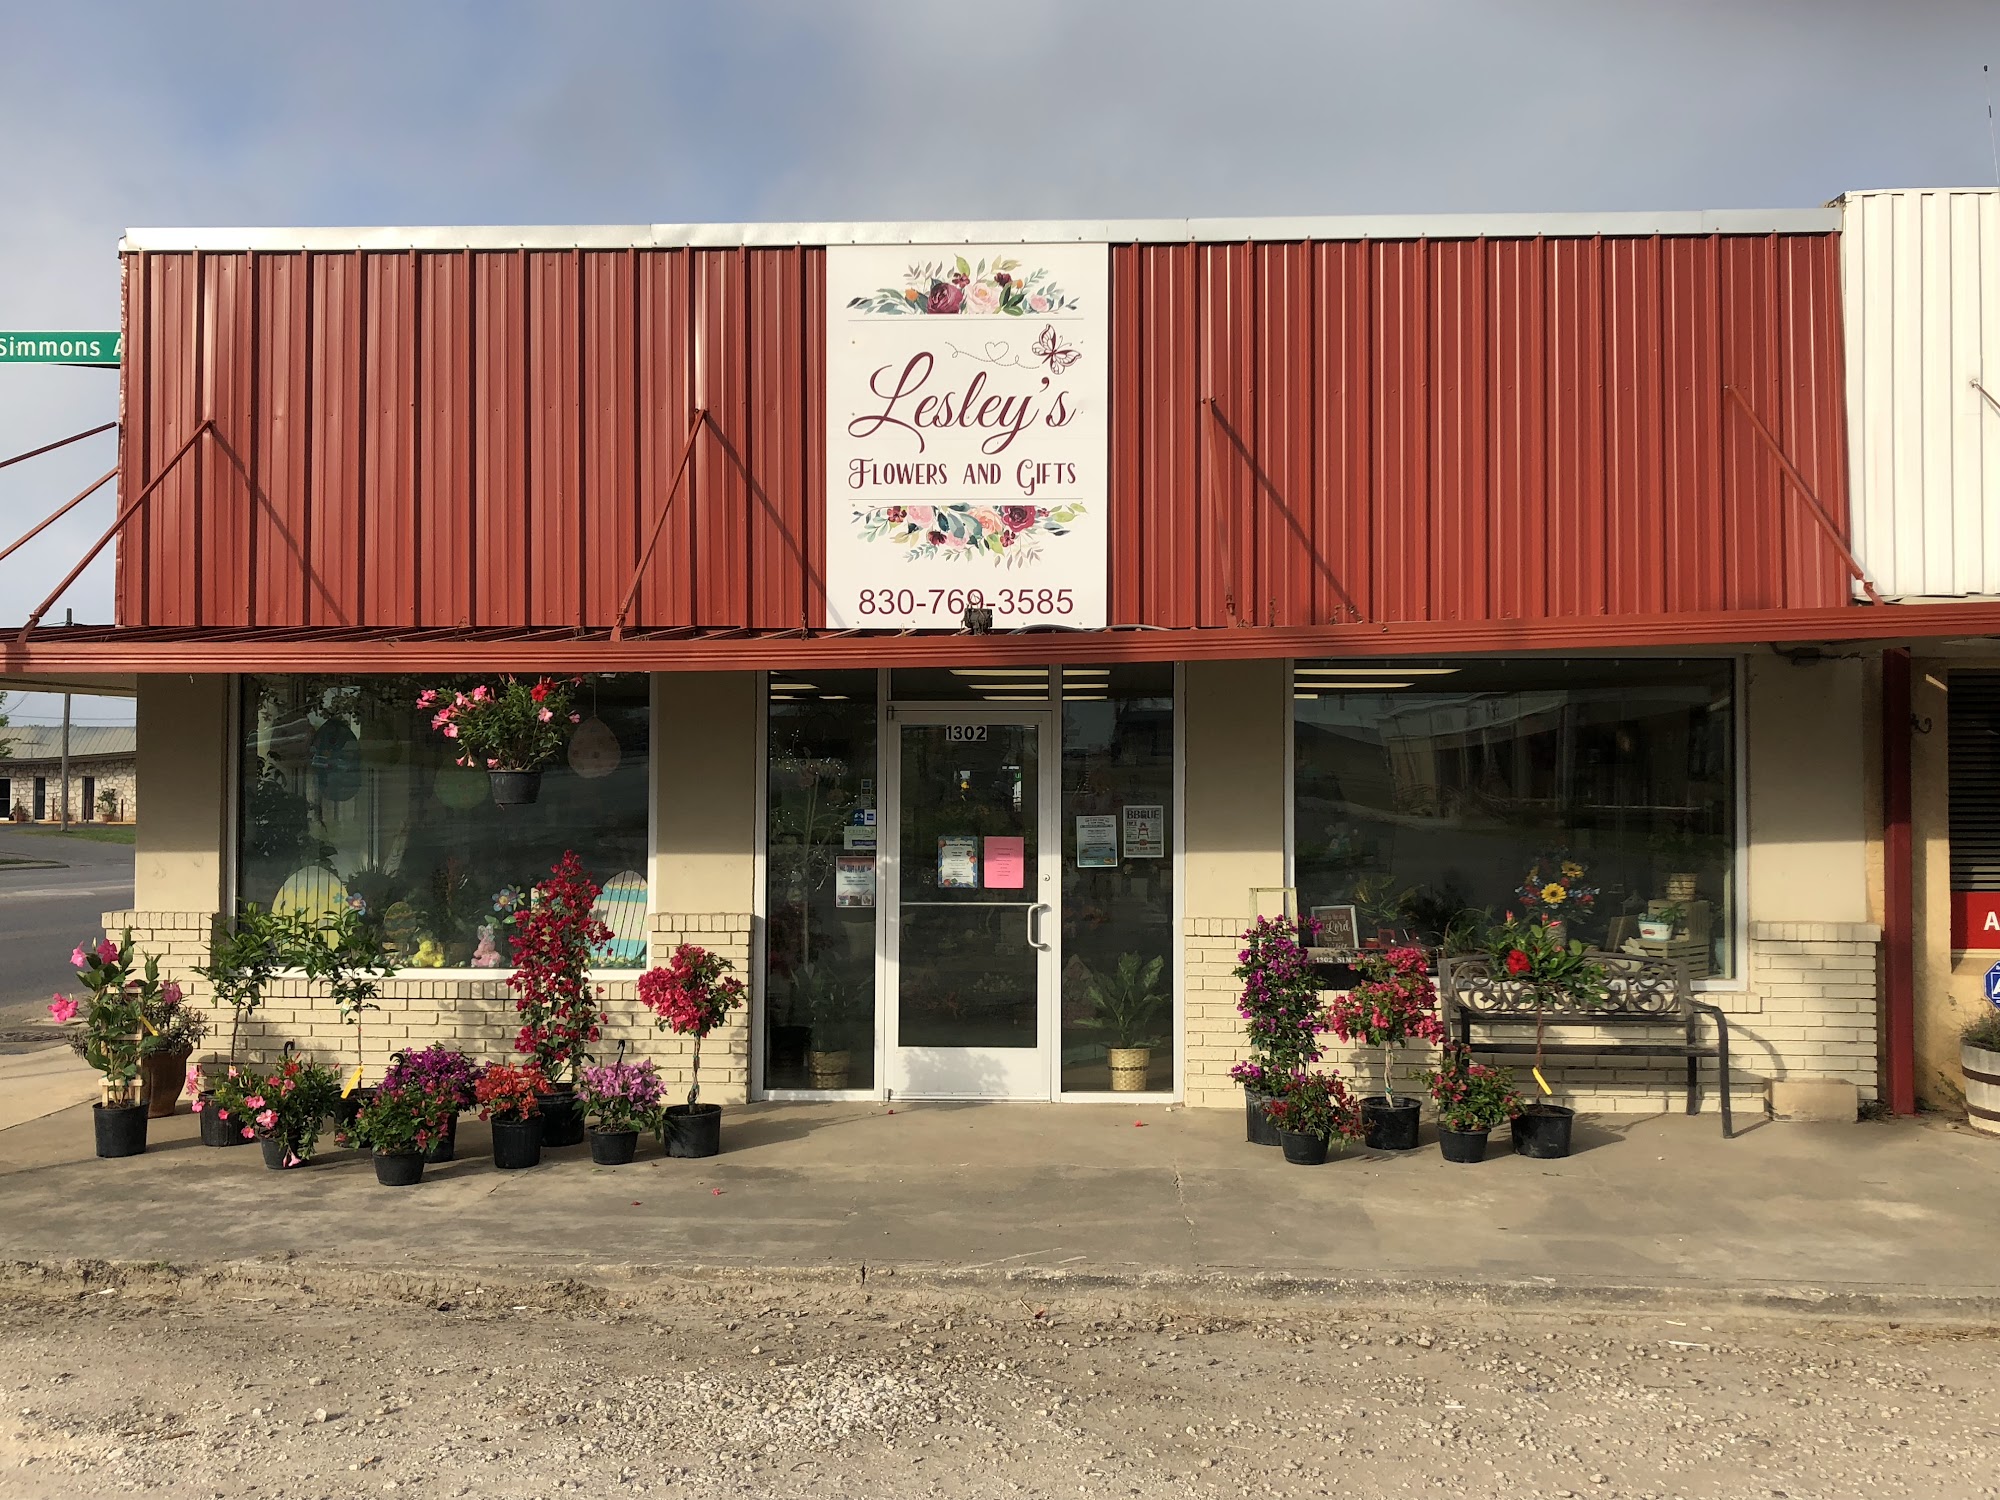 Lesley's Flowers and Gifts 1302 Simmons Ave, Jourdanton Texas 78026